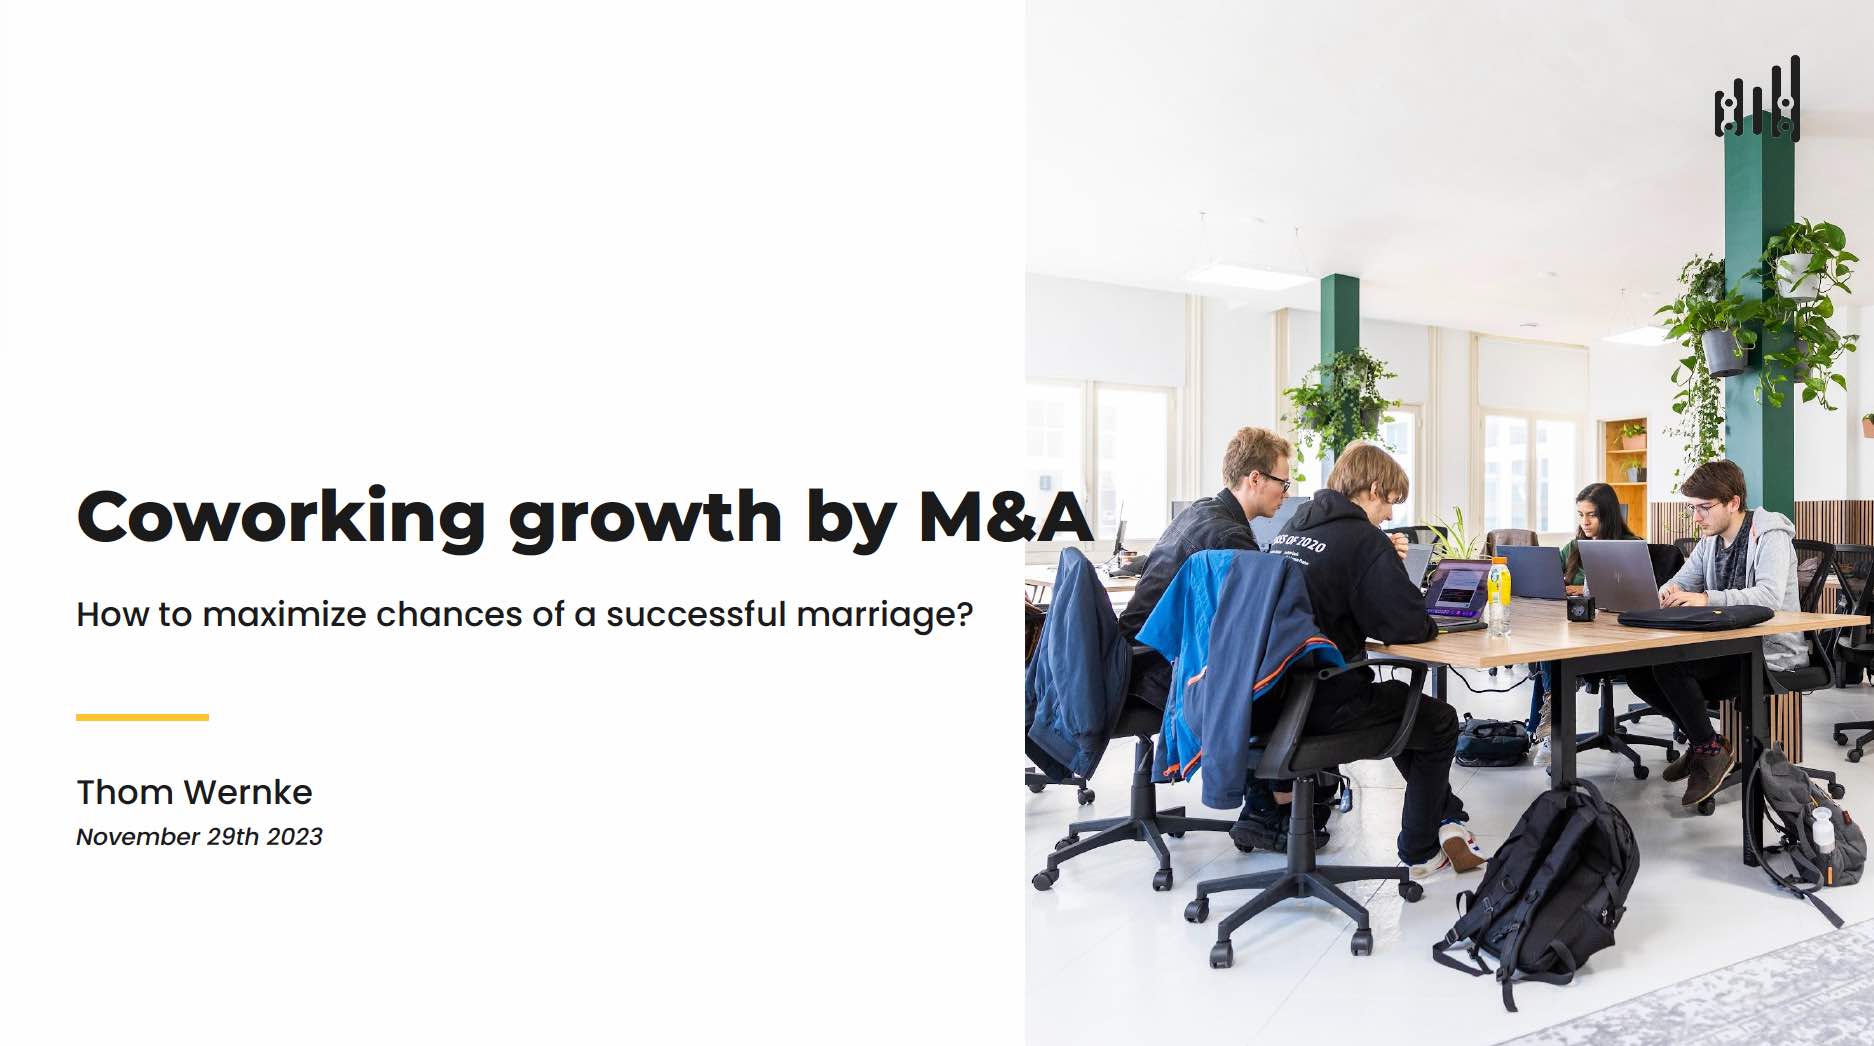 Coworking growth by M&A: How to maximize chances of a successful marriage? (CWE23)